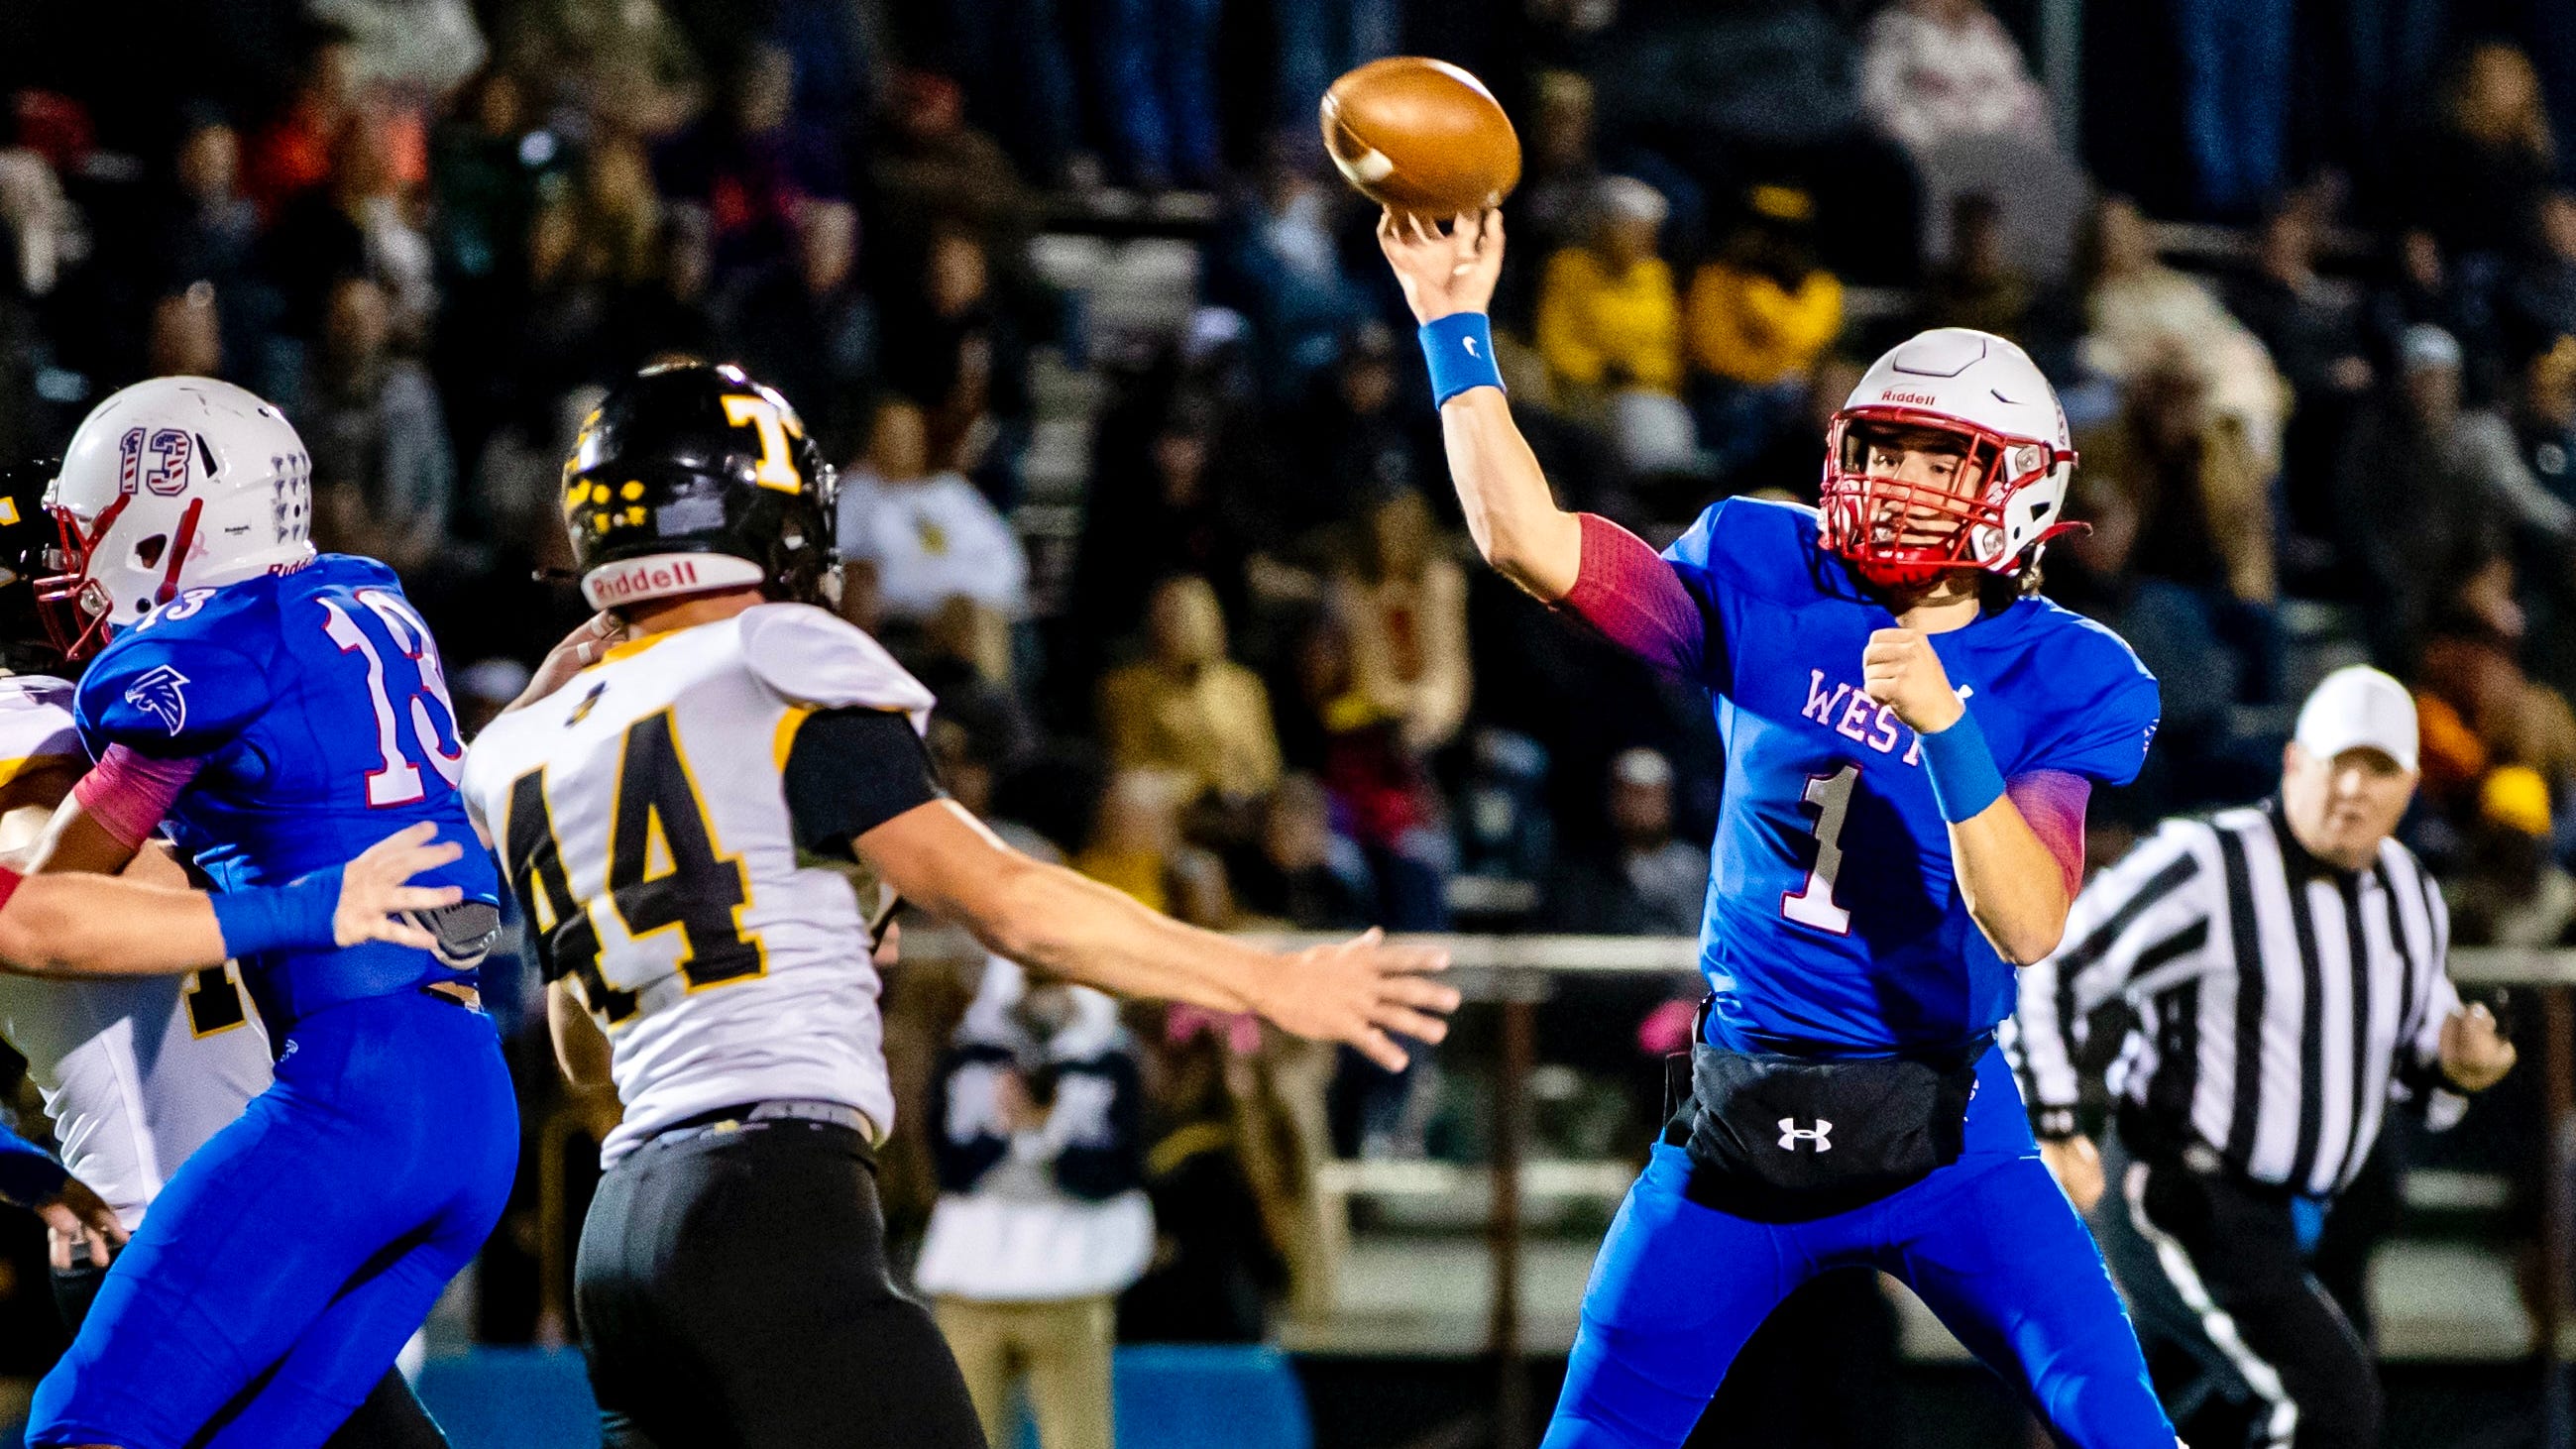 West Henderson football stunned by East Guilford as dream season ends